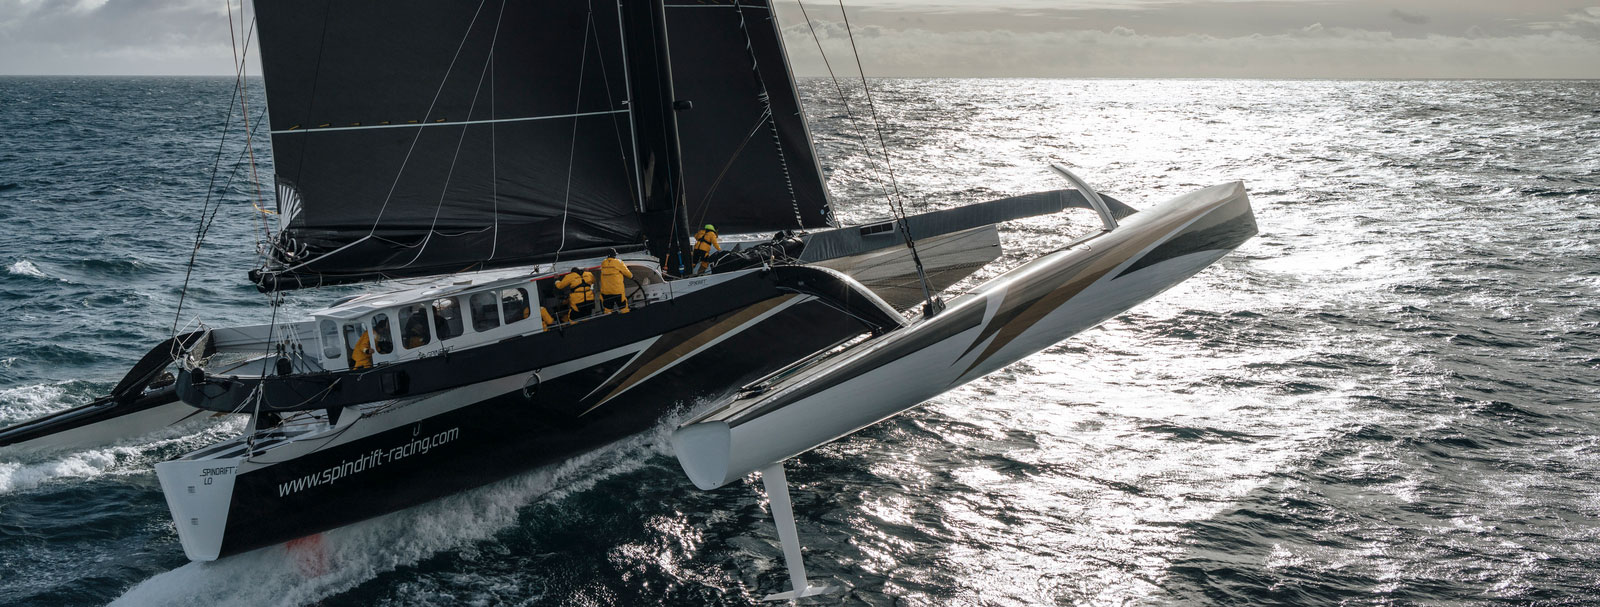  Ocean Records  Trophee Jules Verne  Spindrift to start during the coming night